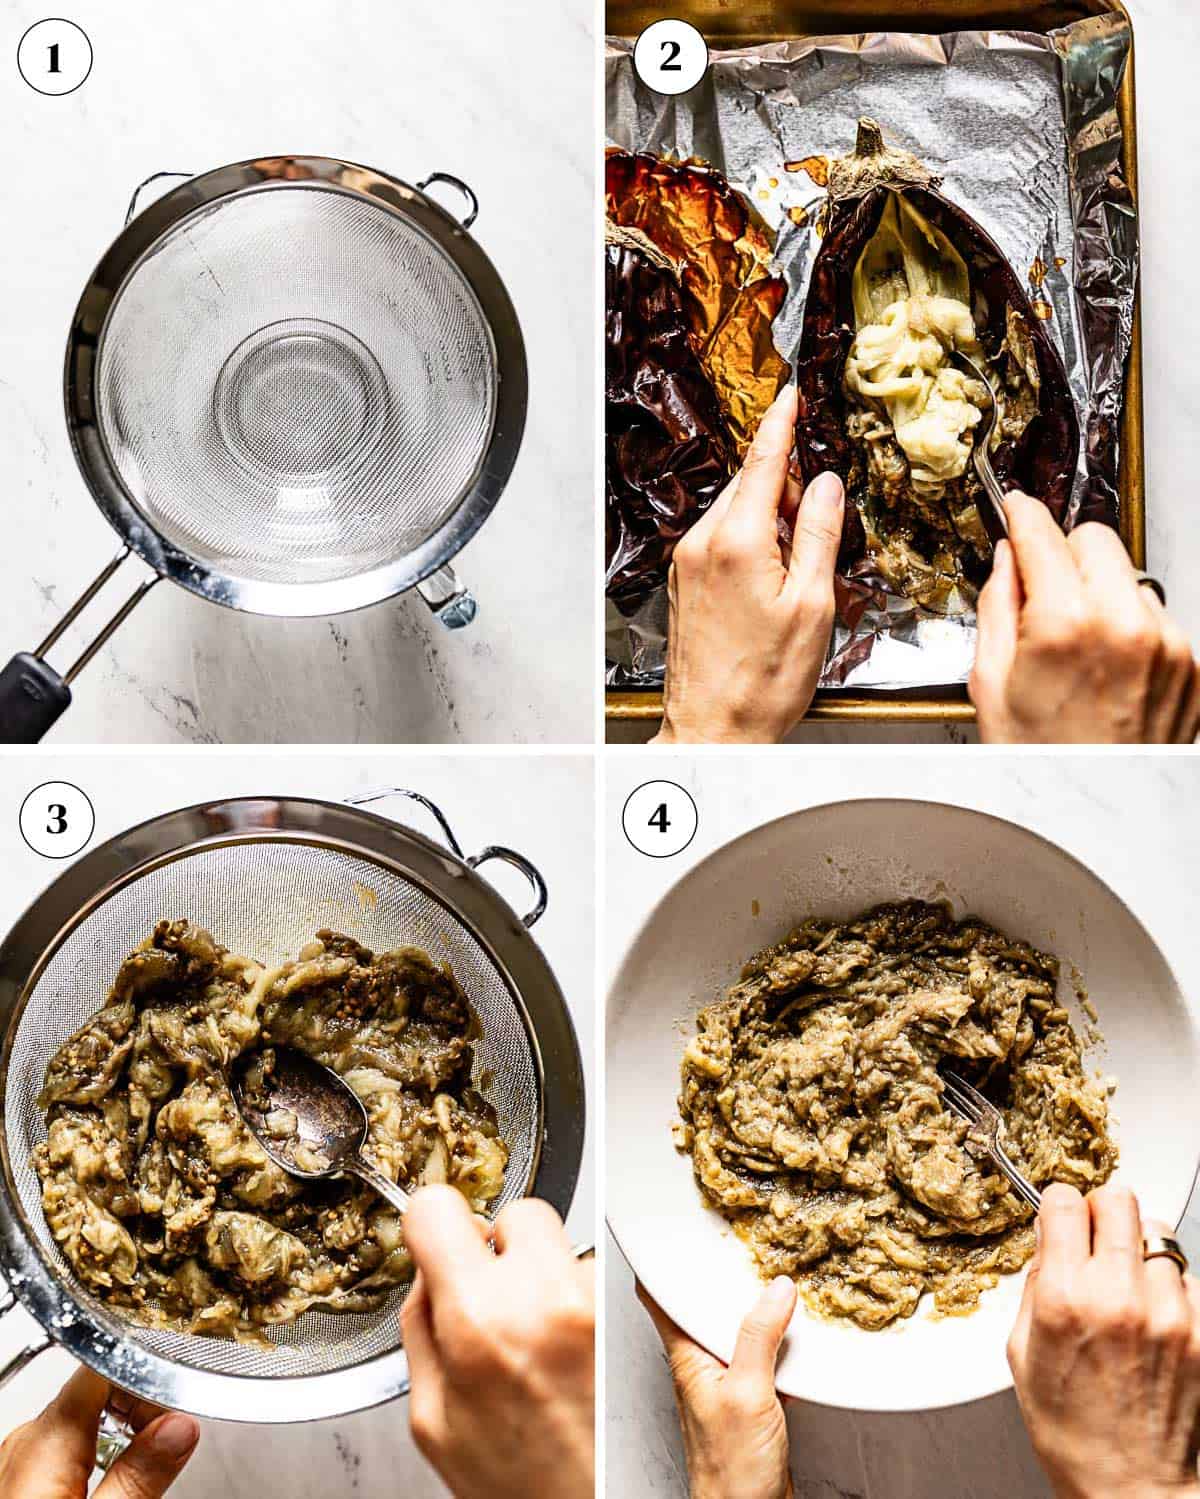 A collage of images showing how to make baba ghanoush.